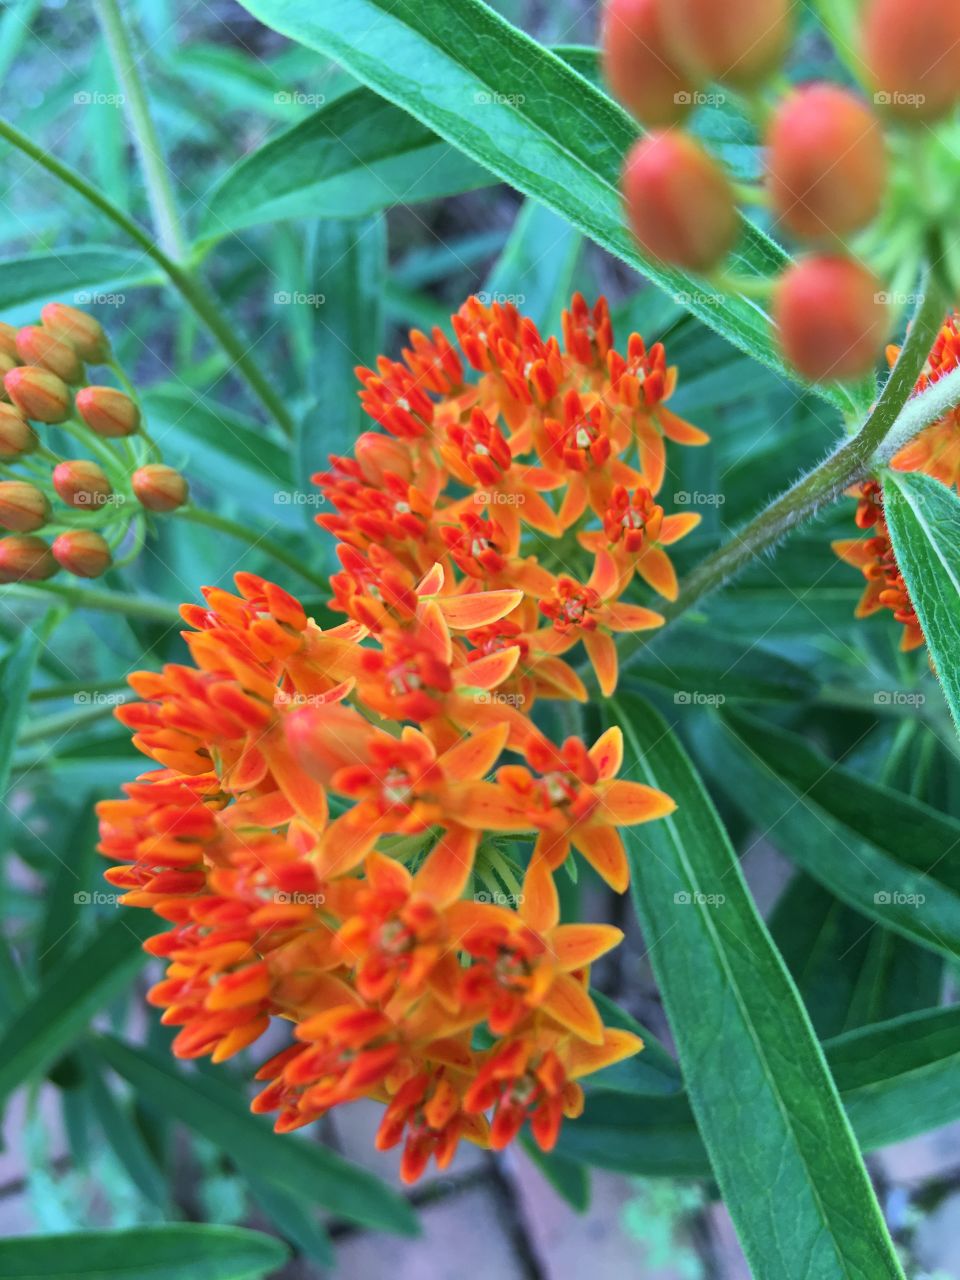 Cluster of orange flowers brightening the day.